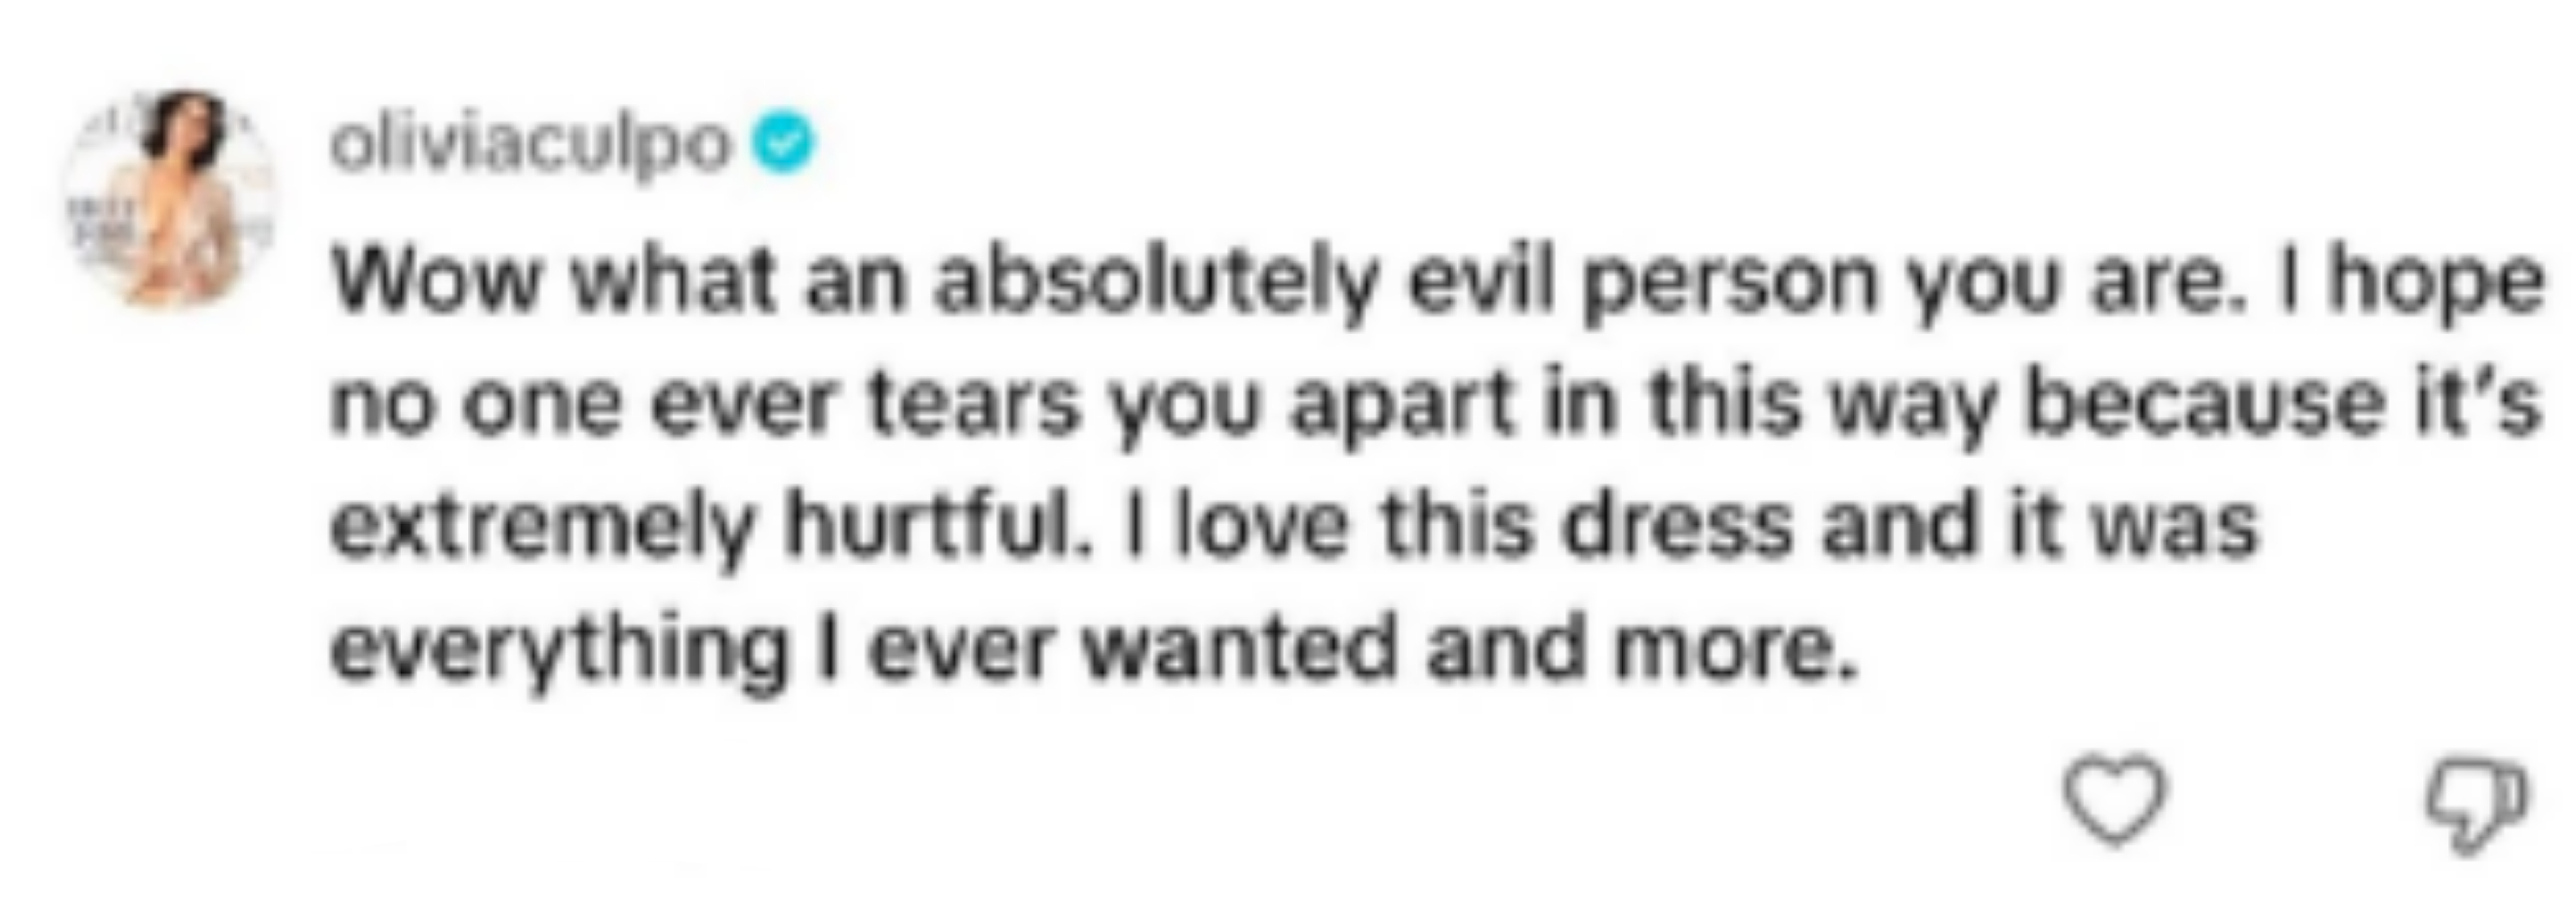 Comment from Olivia Culpo: &quot;Wow what an absolutely evil person you are. I hope no one ever tears you apart in this way because it’s extremely hurtful. I love this dress and it was everything I ever wanted and more.&quot;